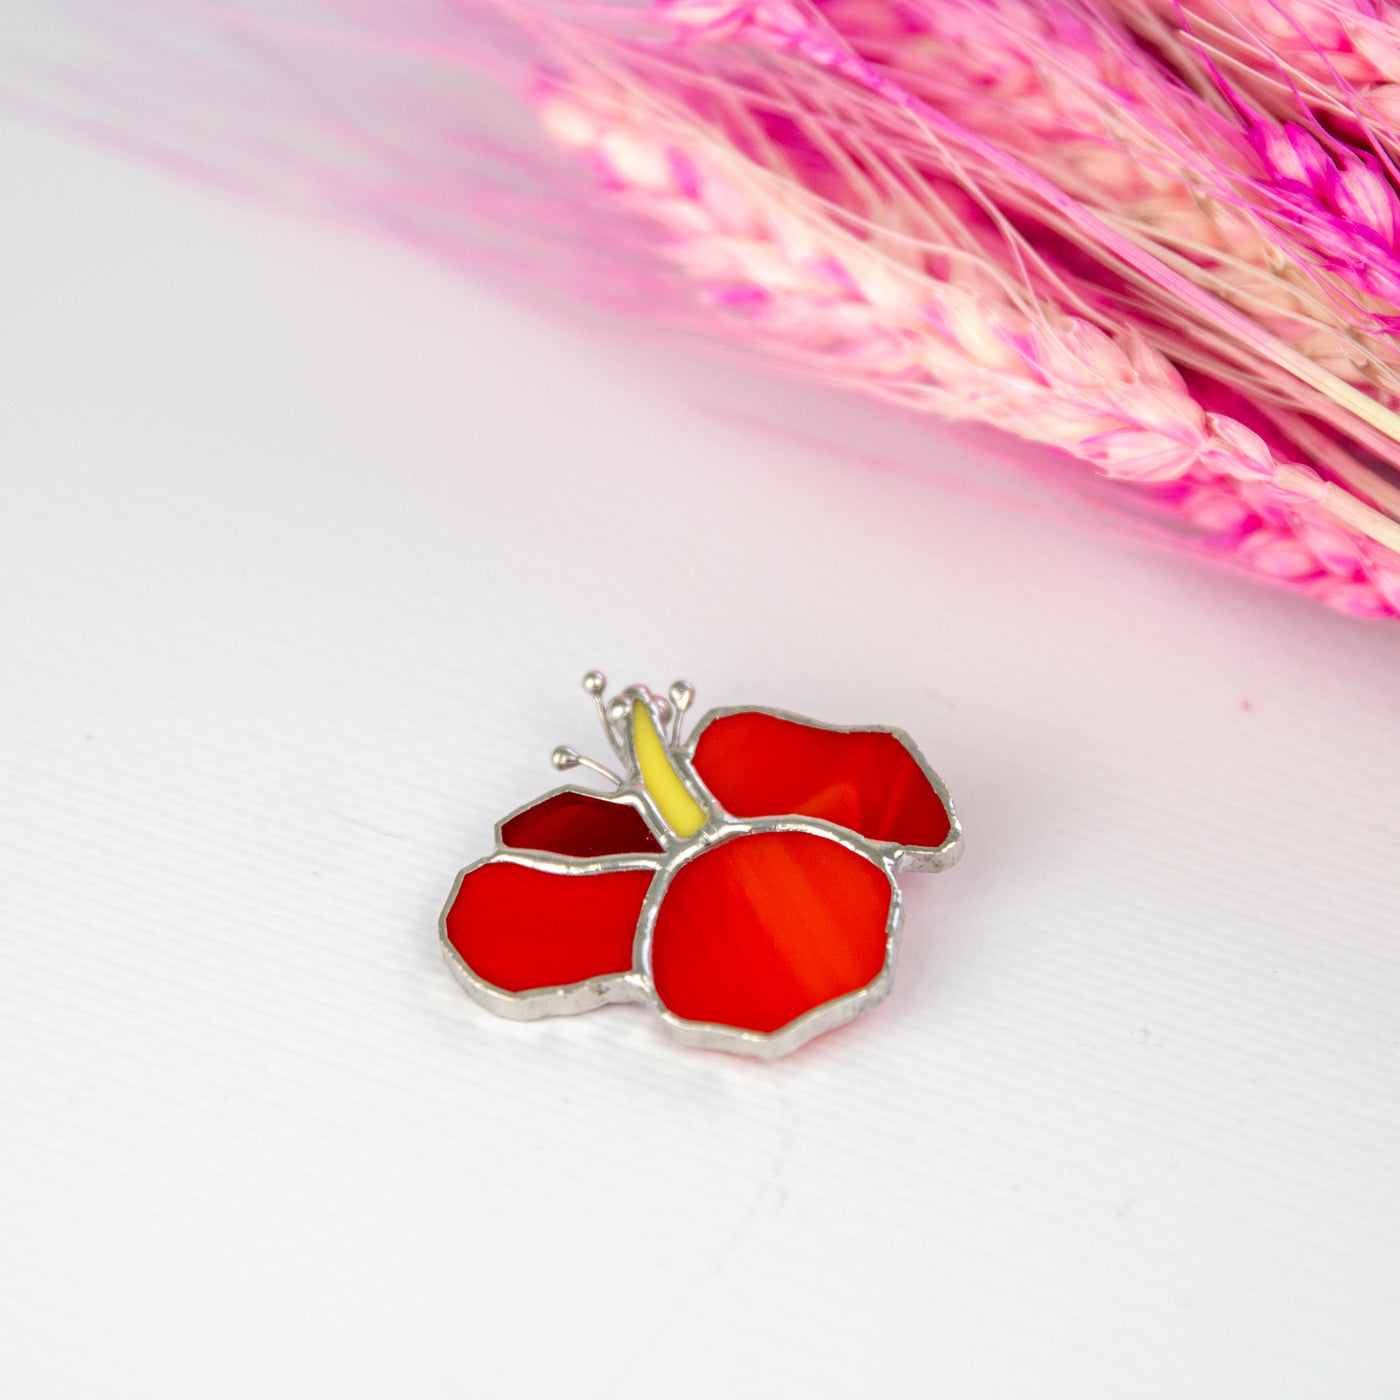 Zoomed stained glass red hibiscus flower pin